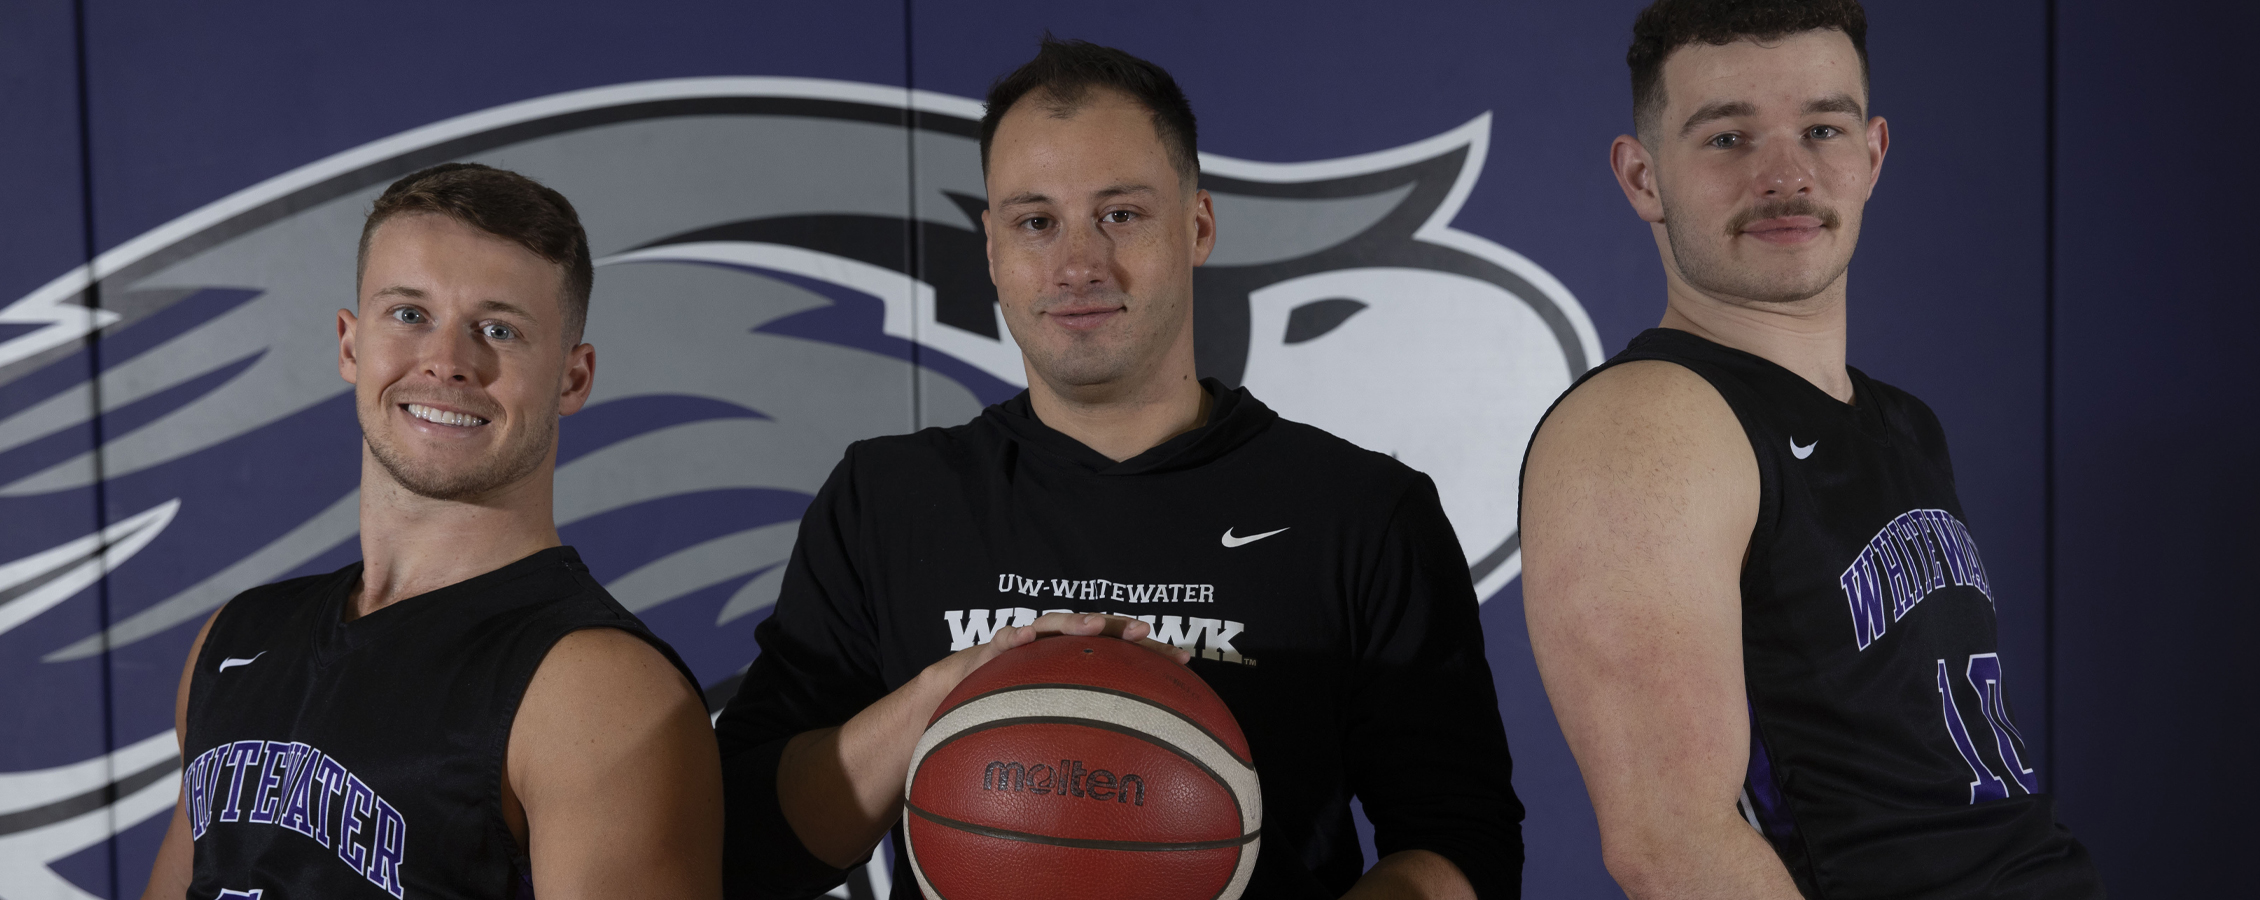 Three Warhawks pose in front of a Warhawk wall and hold a basketball.